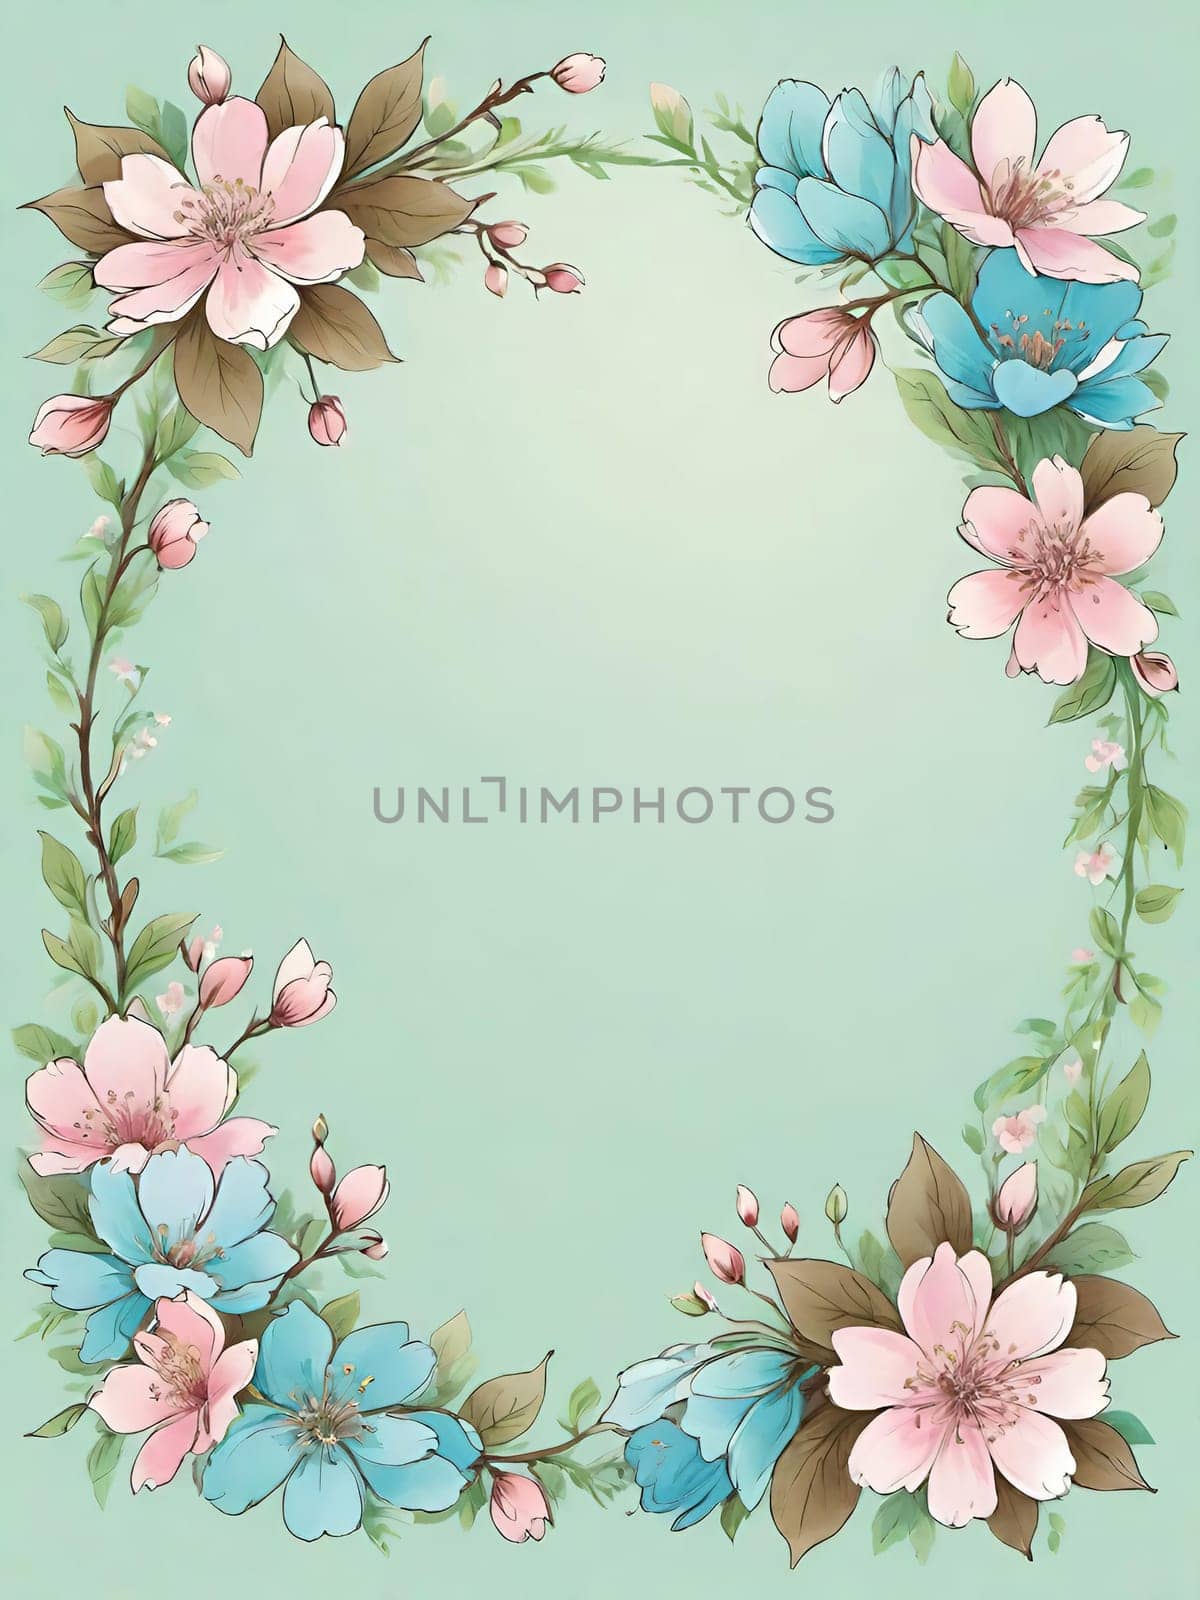 Floral wreath with spring flowers on background. Vector illustration by yilmazsavaskandag